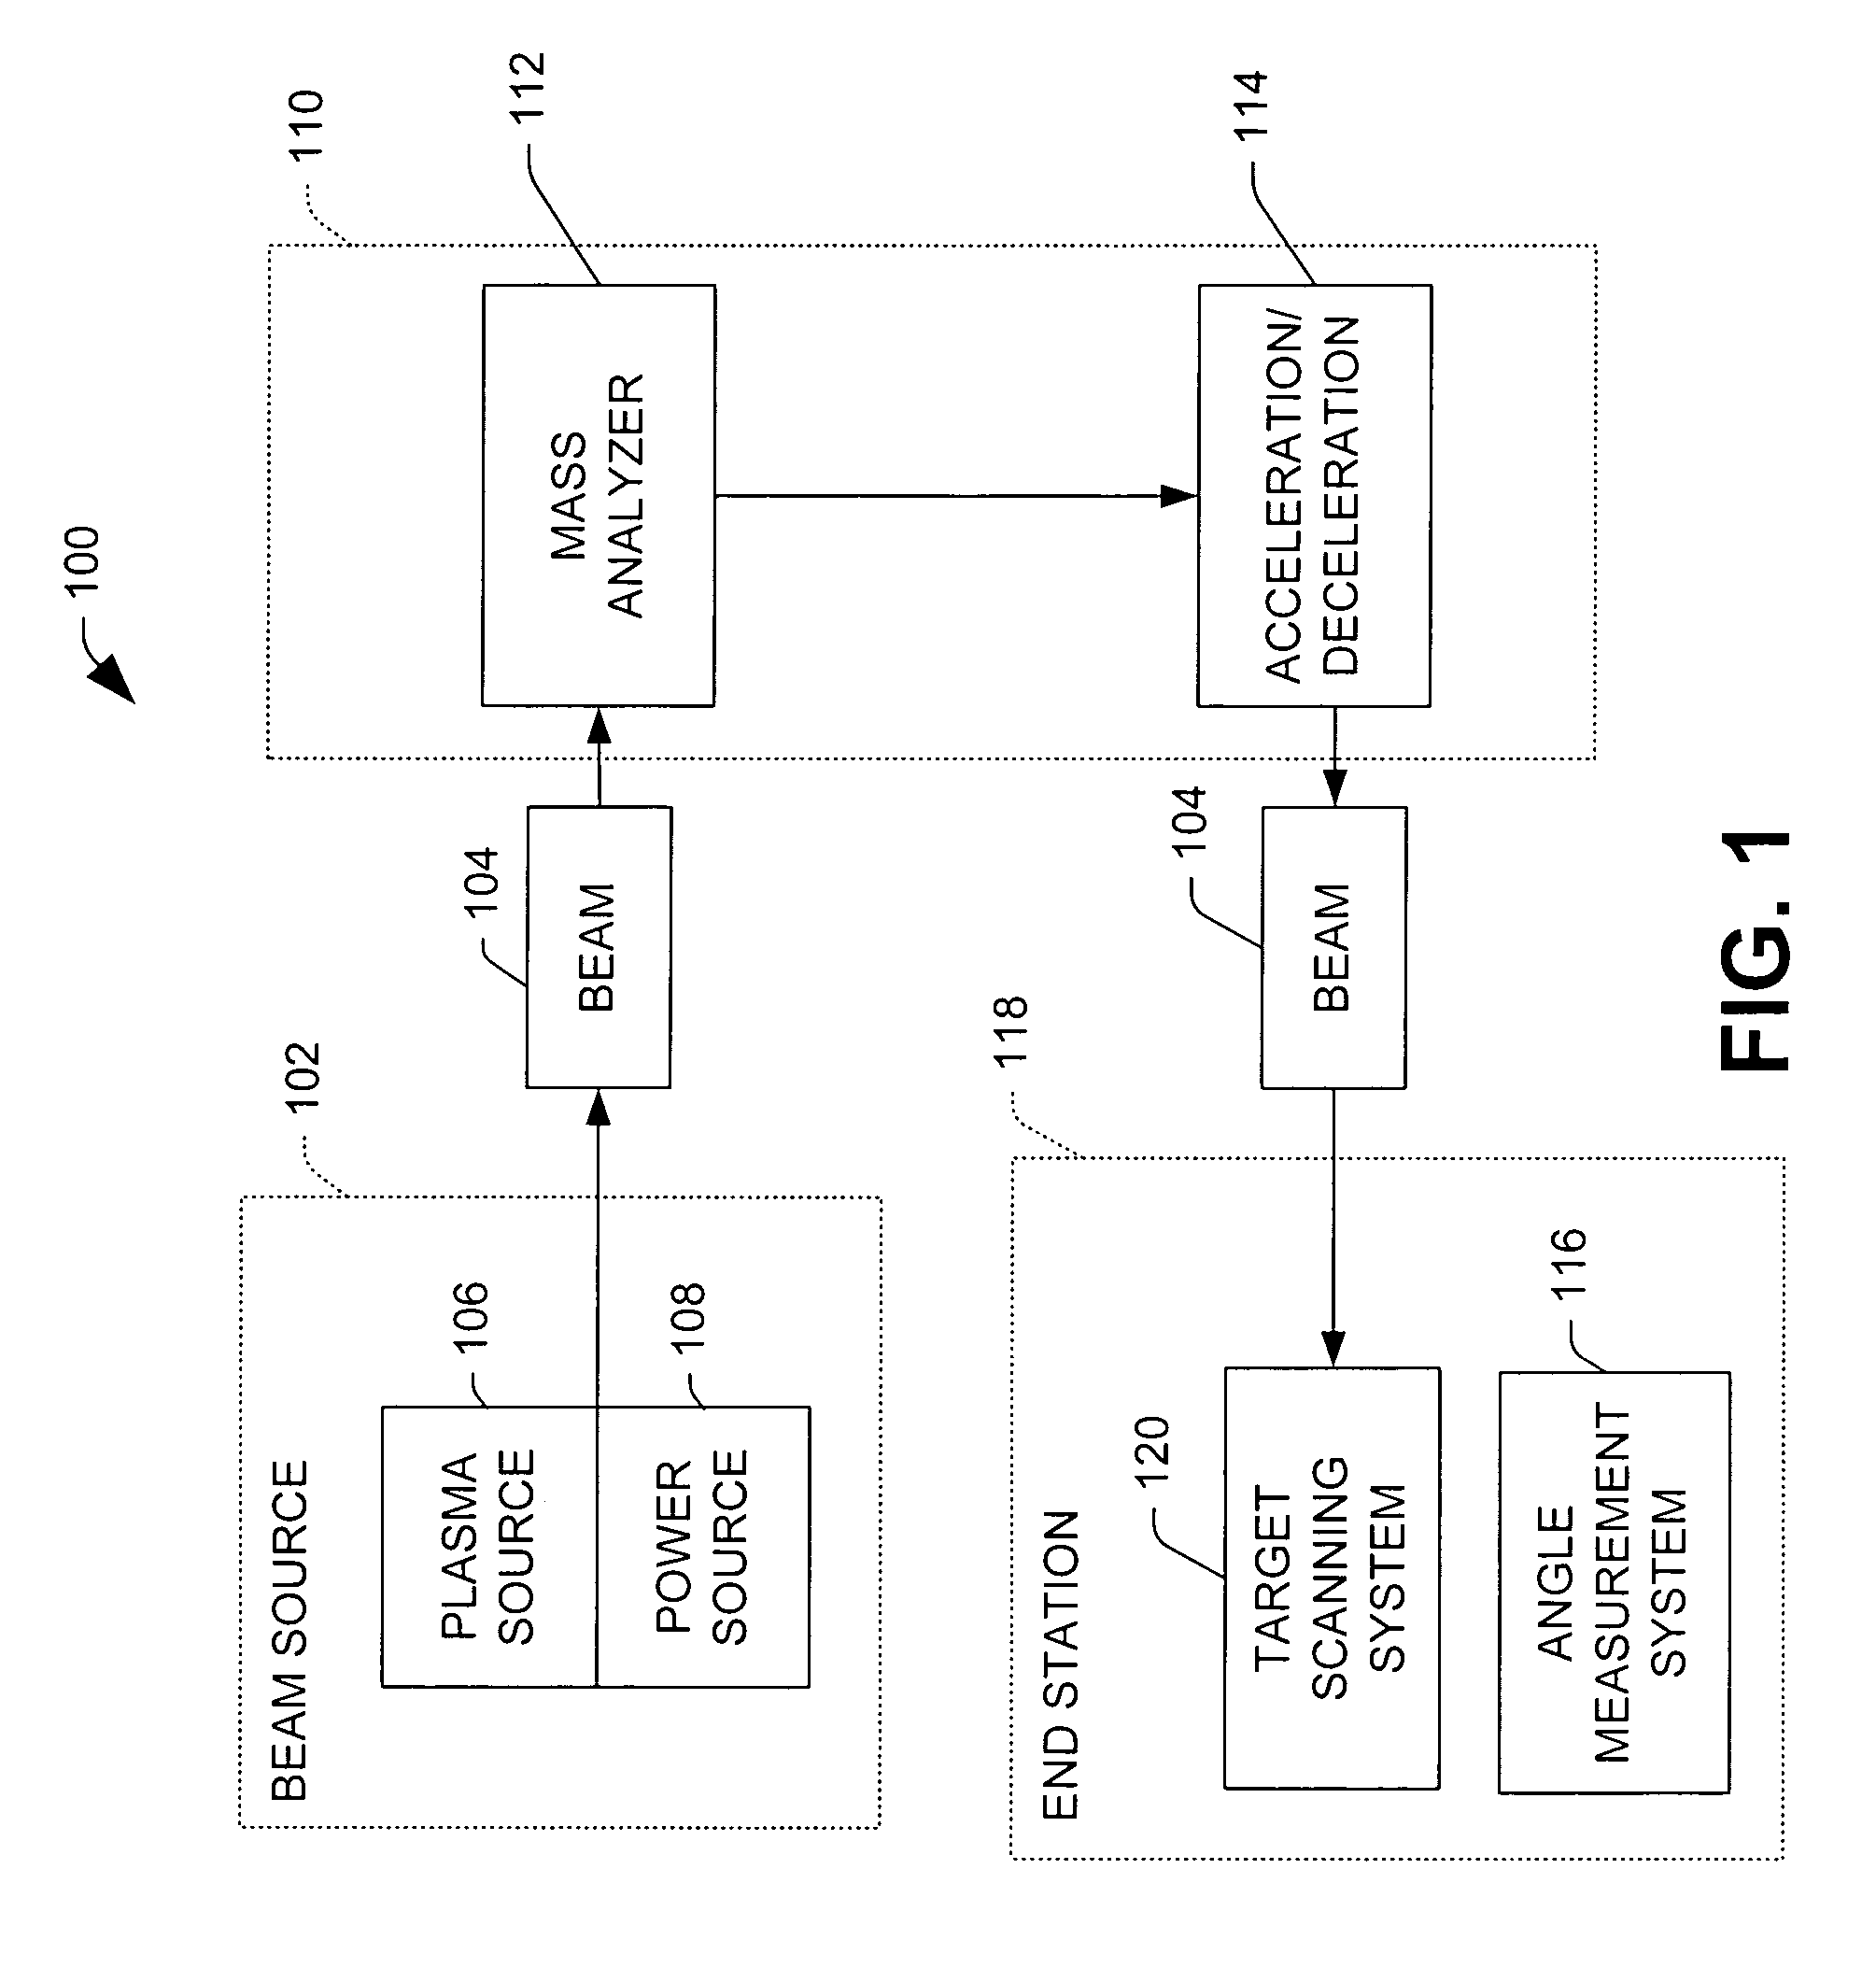 Ion beam angle measurement systems and methods employing varied angle slot arrays for ion implantation systems